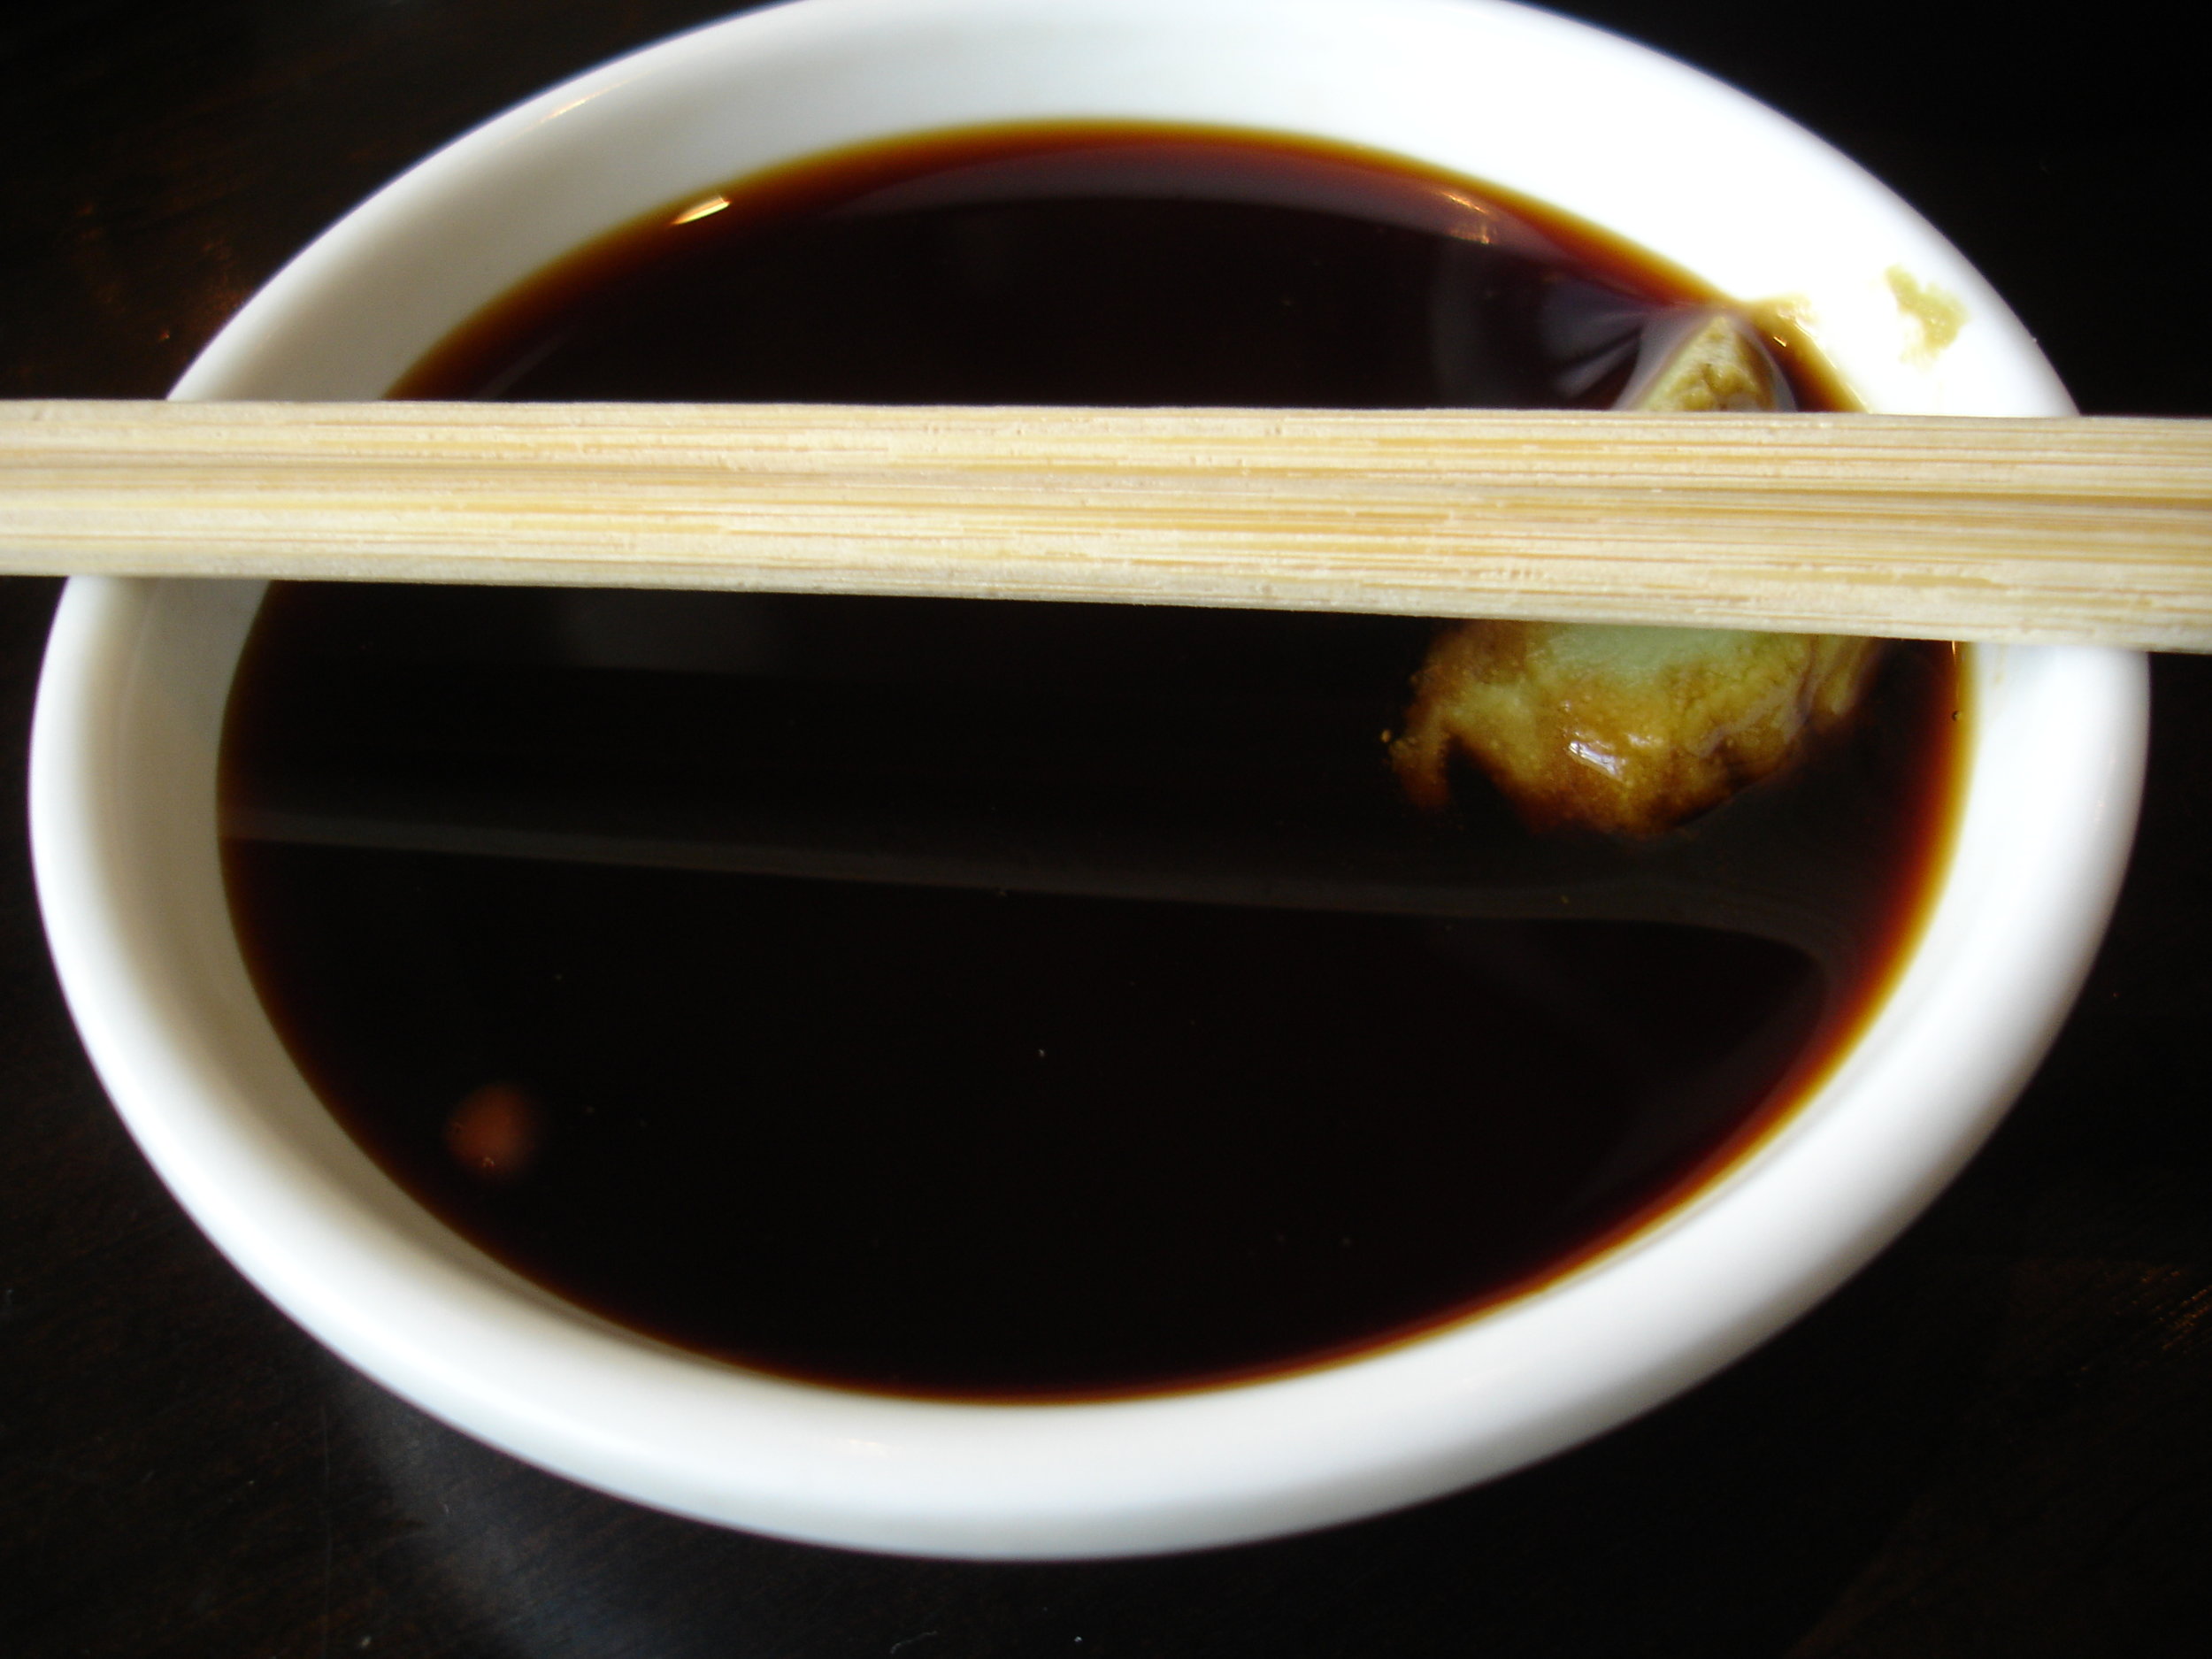 "Soy Sauce and Wasabi by Father of dok1 / Melissa Doroquez Flickr photo. Licensed under CC BY 2.0 via Commons - https://commons.wikimedia.org/wiki/File:ChristmasEveOhio1928.jpg#/media/File:ChristmasEveOhio1928.jpg